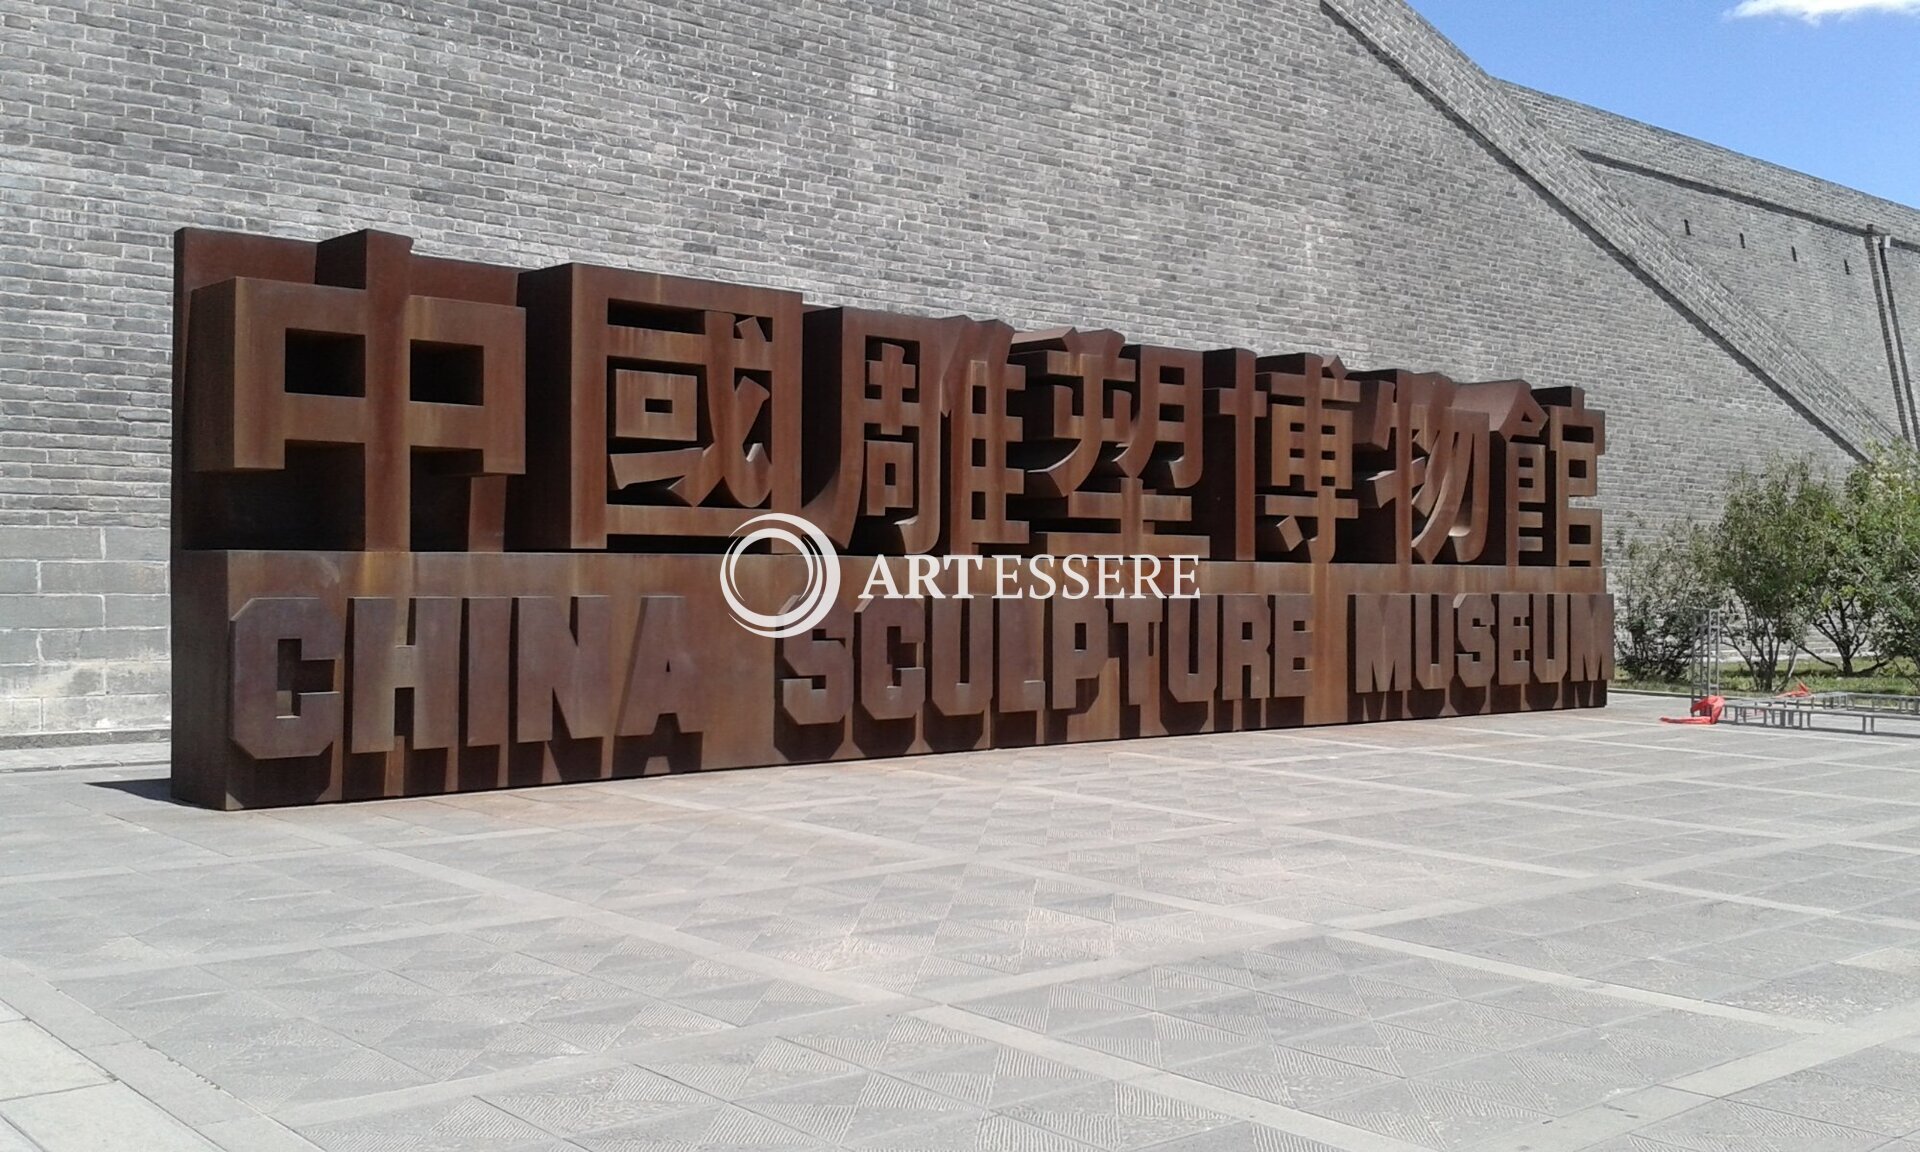 Chinese Sculpture Museum